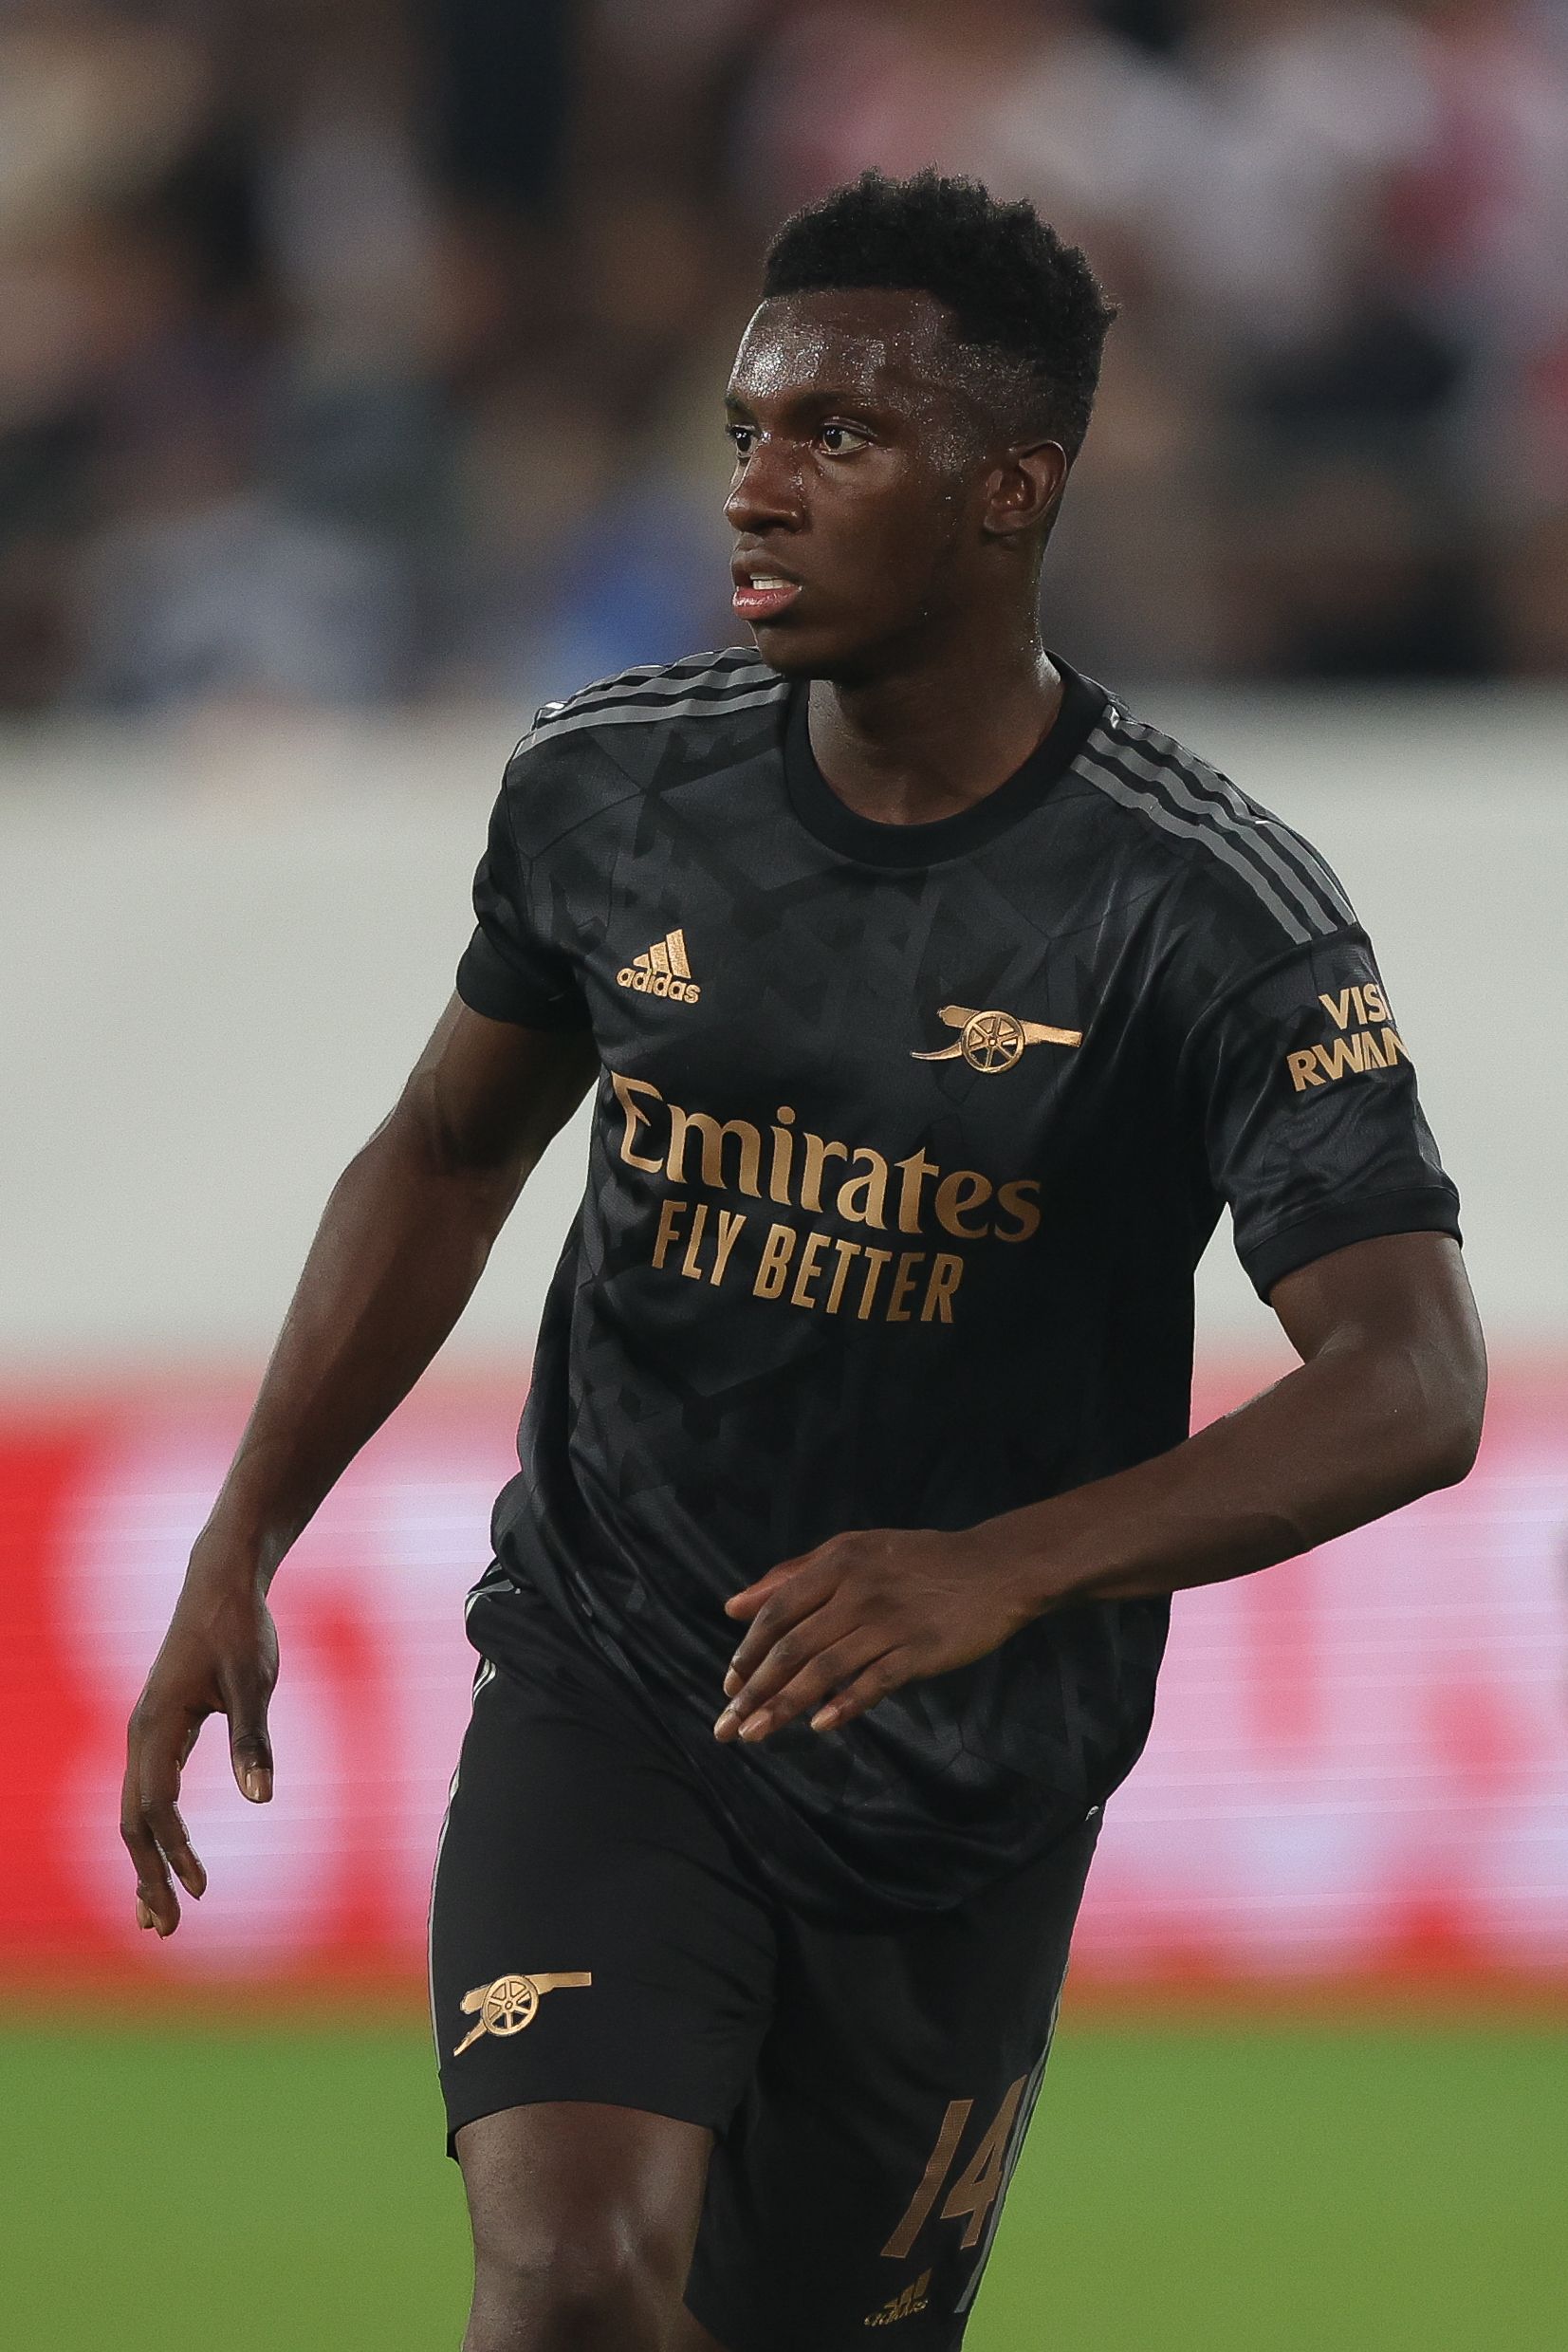 Nketiah in action for Arsenal.